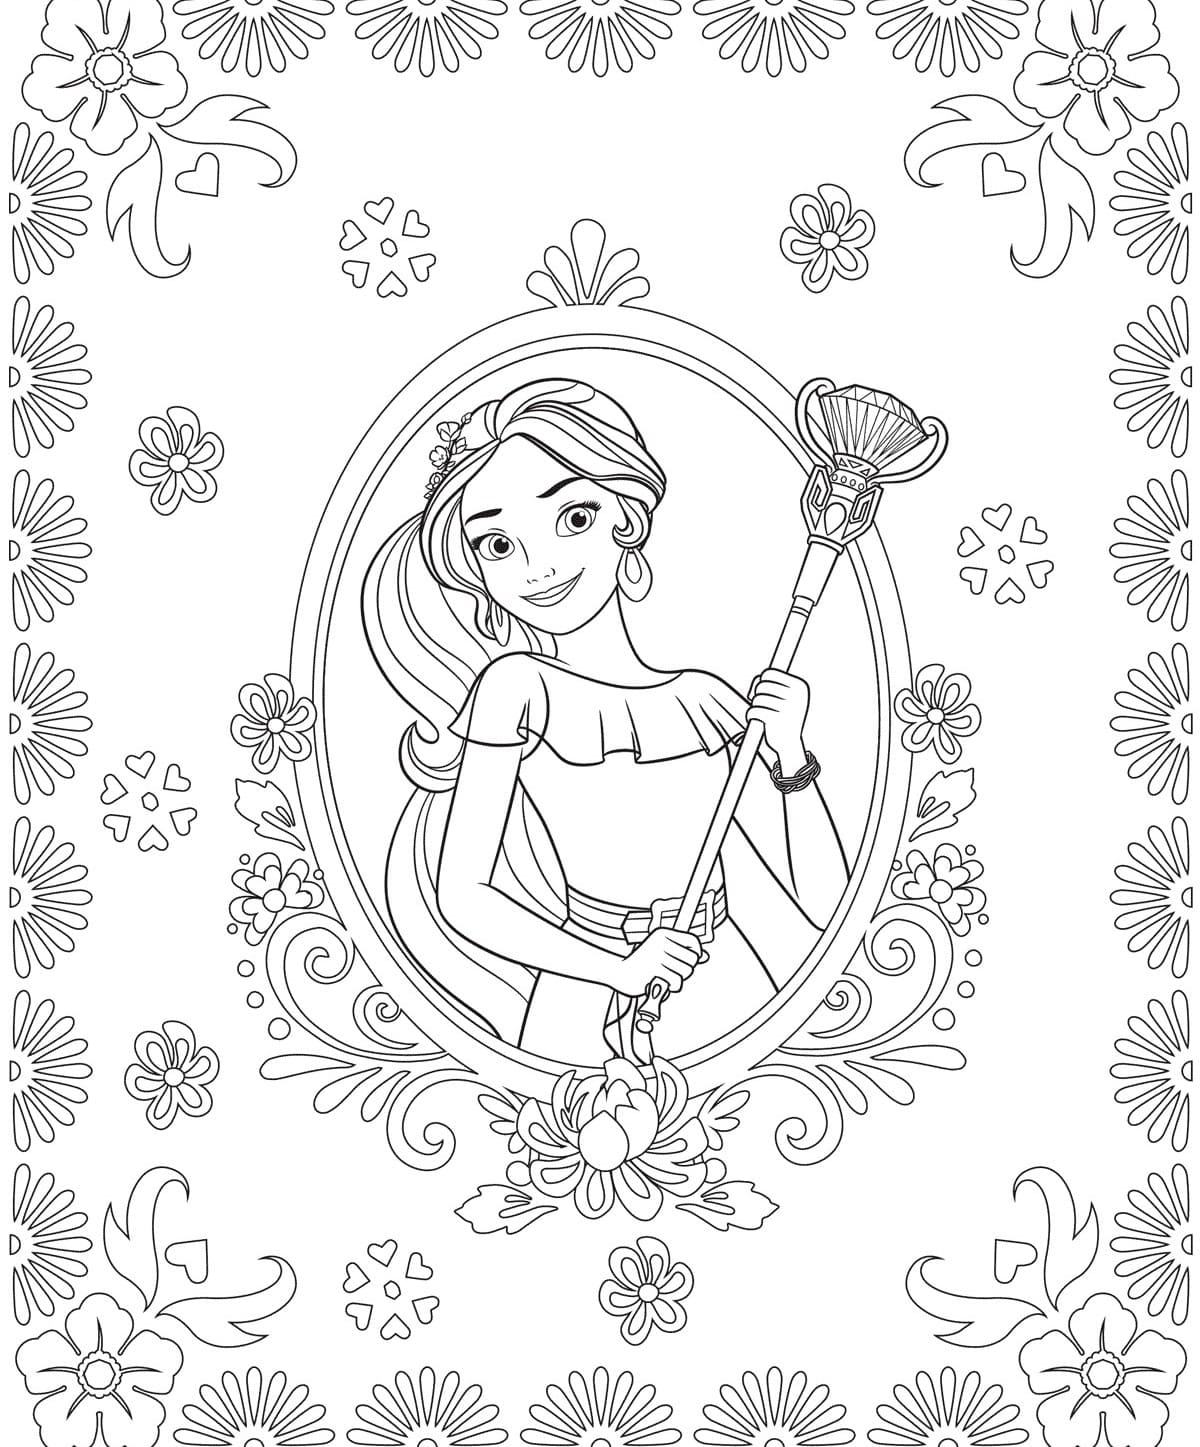 Elena of Avalor Coloring pages - Free Coloring pages for kids